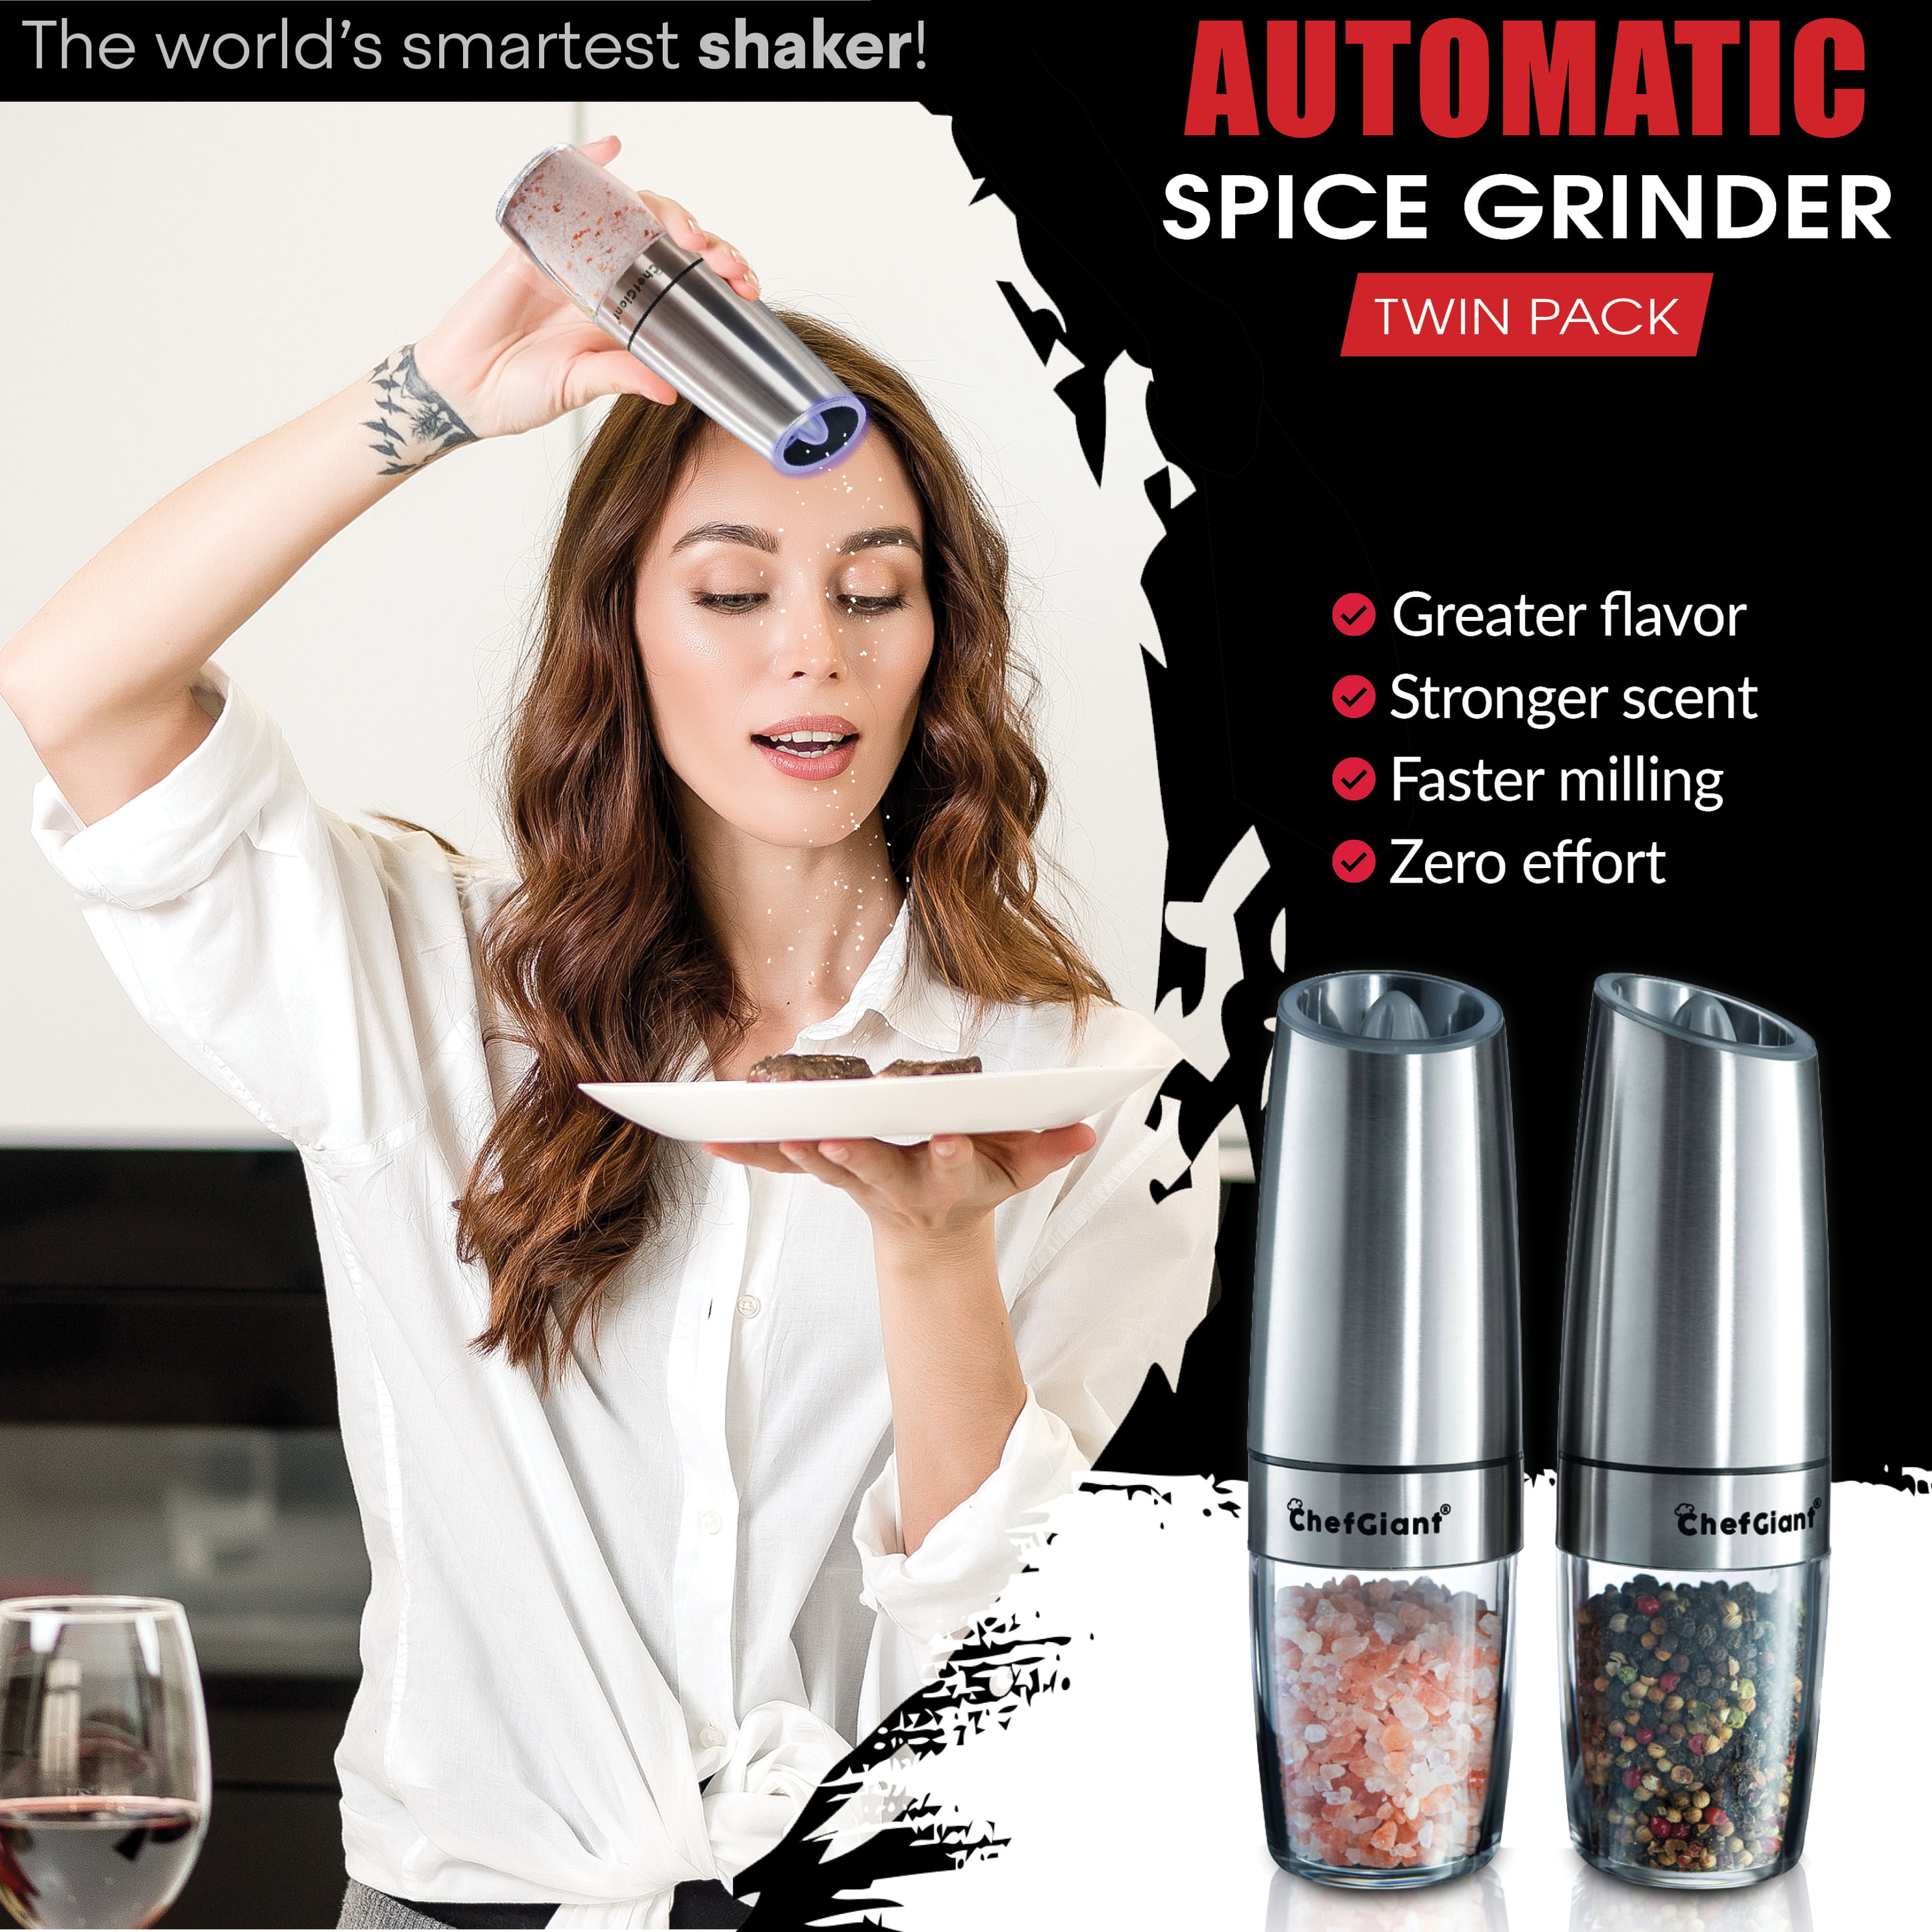 ChefGiant Automatic Gravity Activated Spice Grinder Set CGK6124